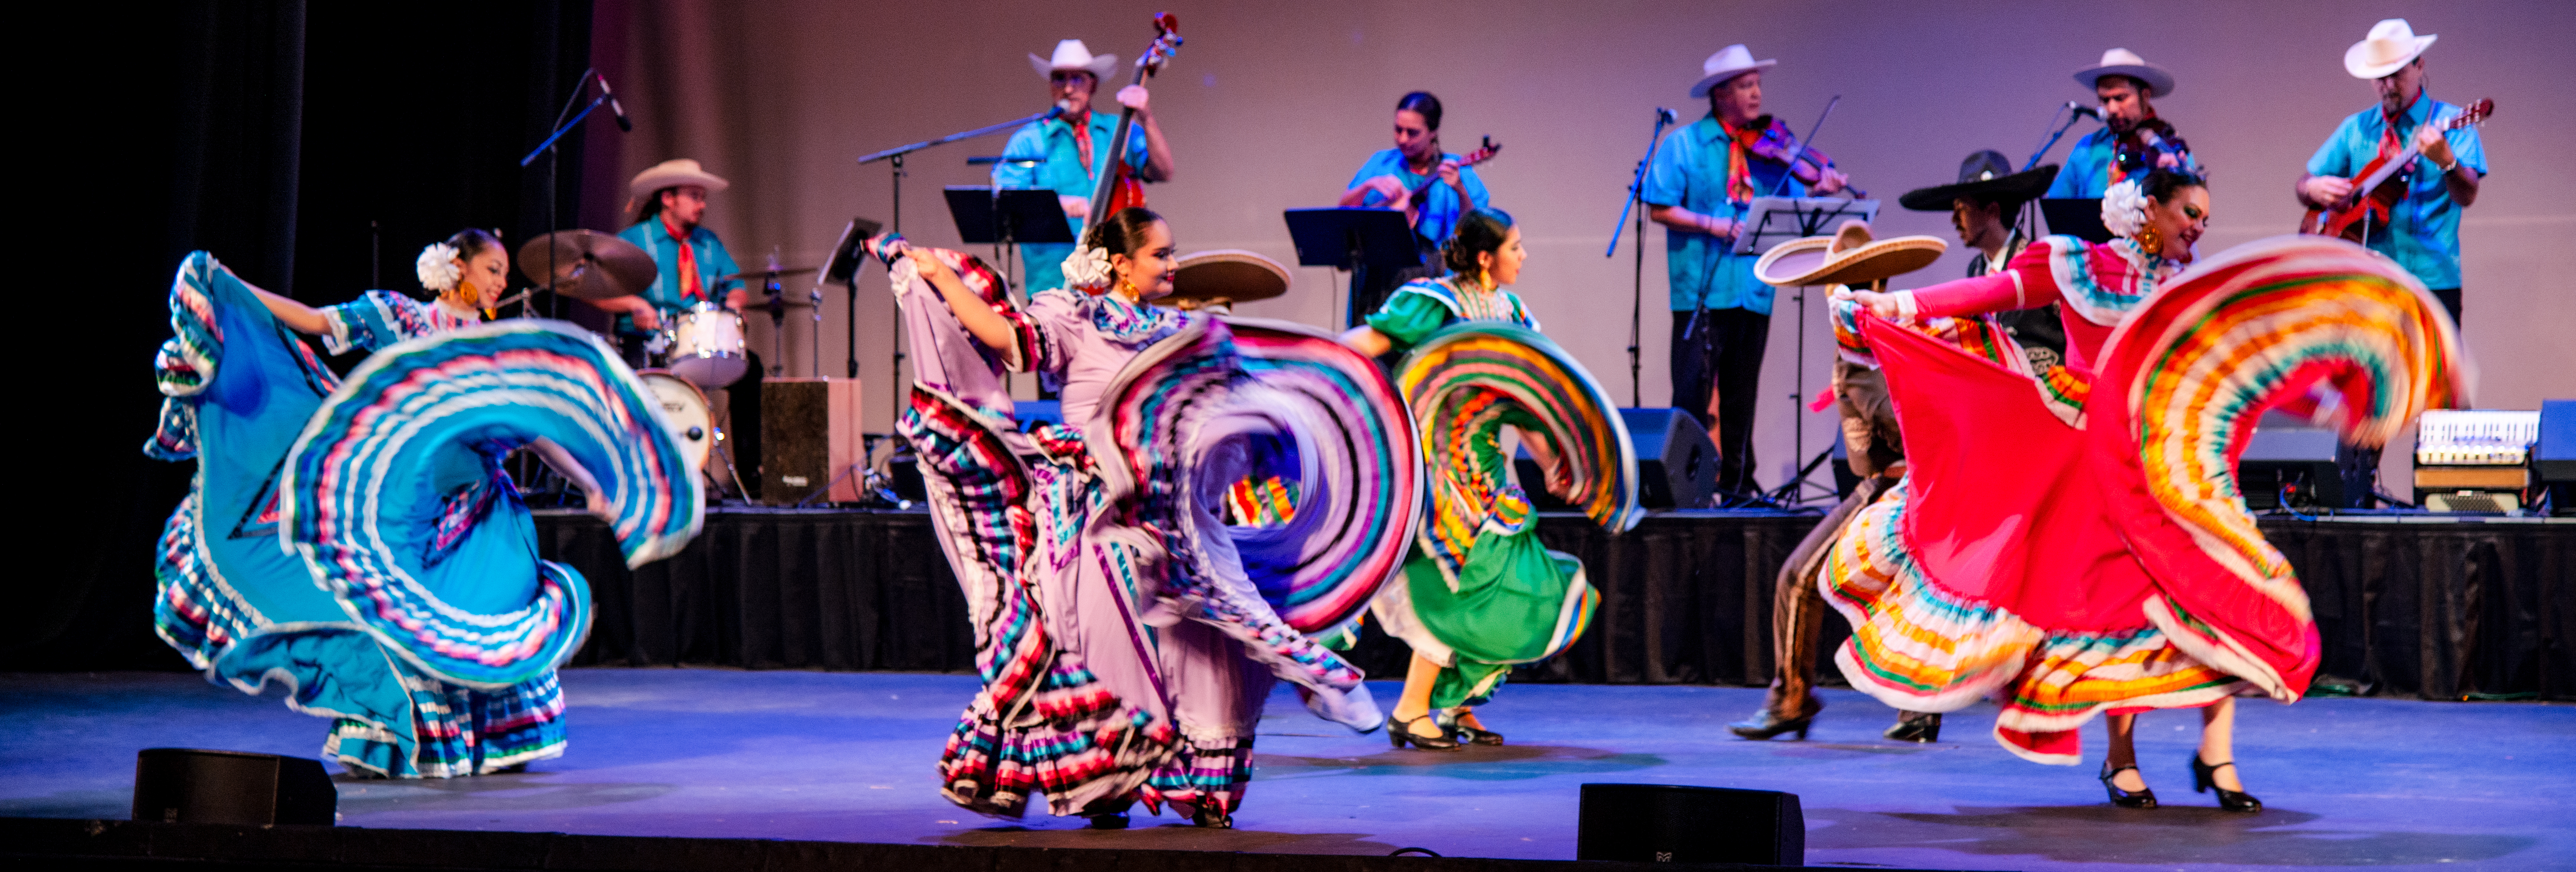 Mexican dancers twirling their skirts in a dance from Jalisco